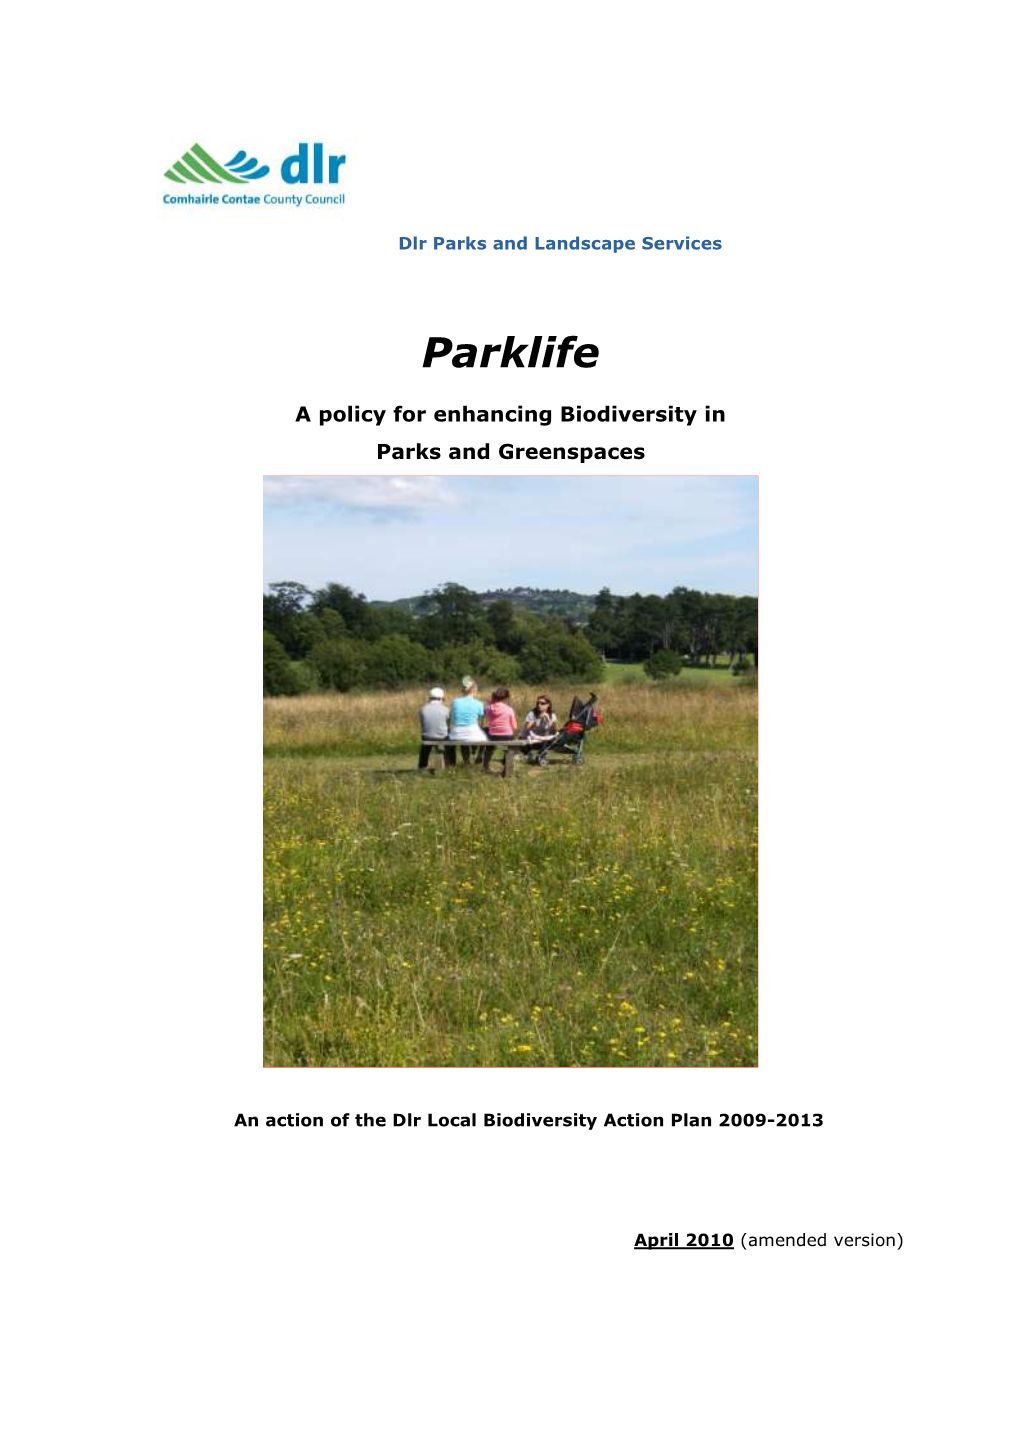 A Biodiversity Policy Document for the Dún Laoghaire-Rathdown